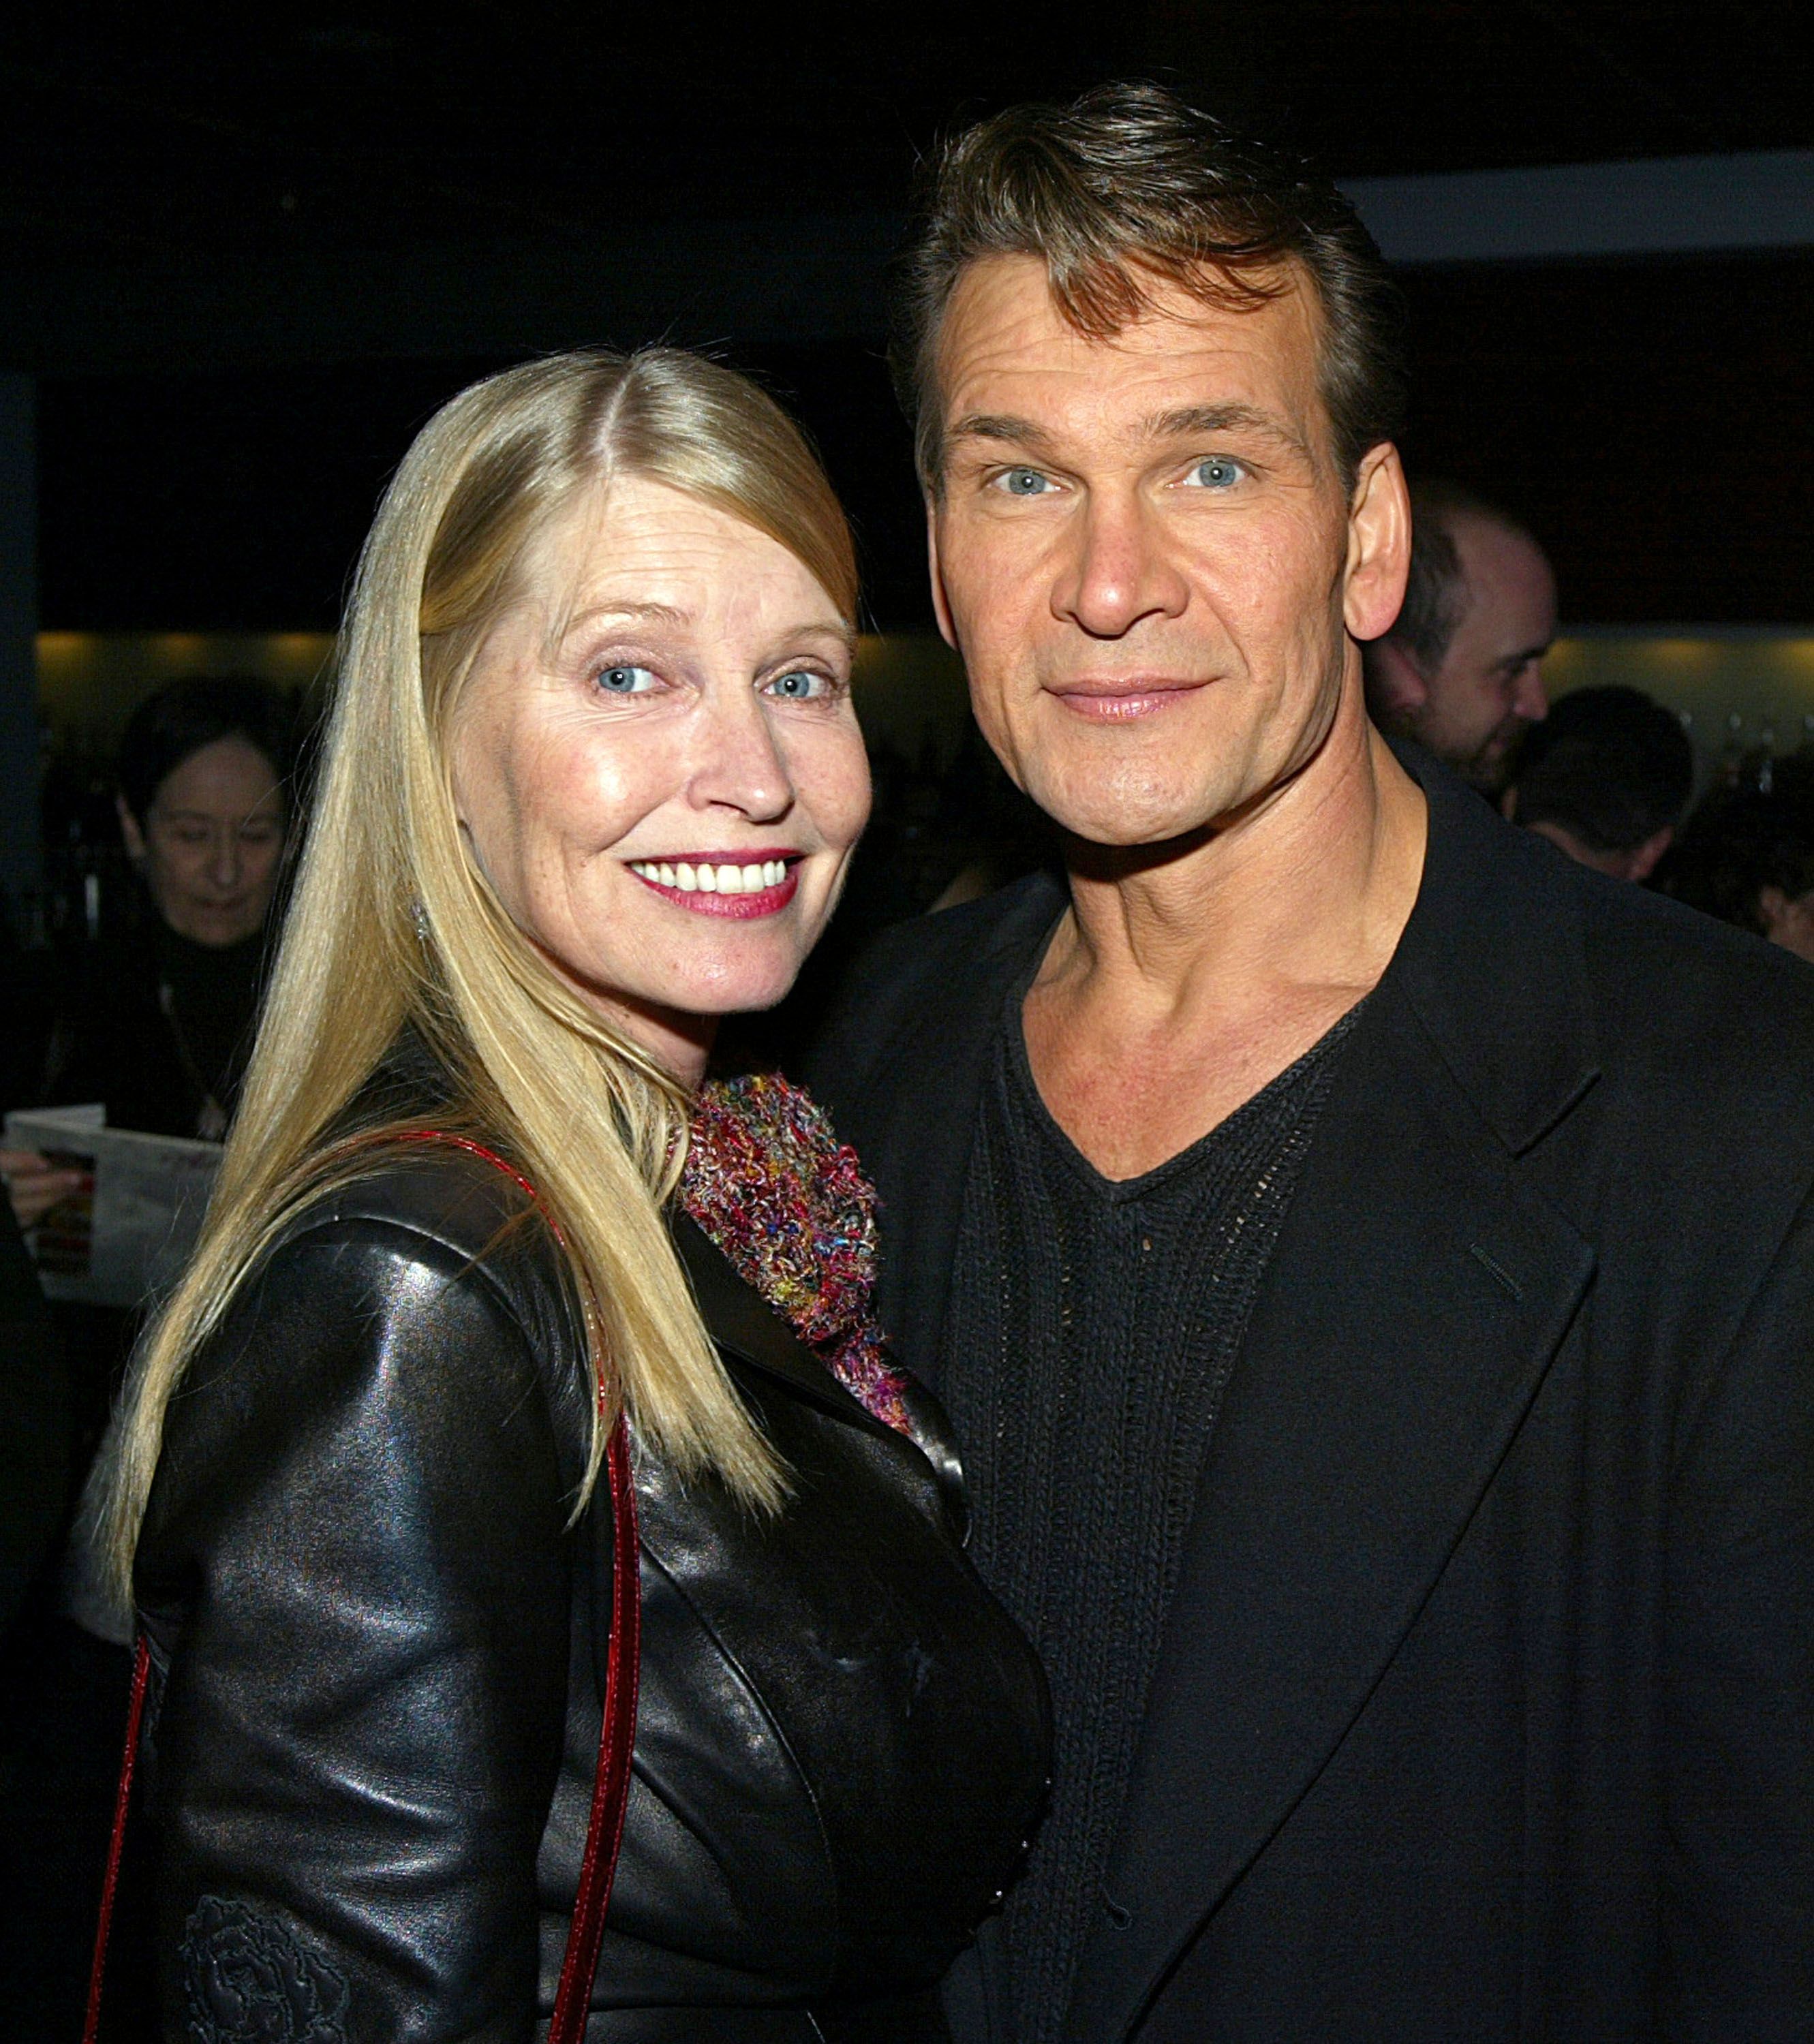 Lisa Niemi and Patrick Swayze at the after-party for "Chicago - The Musical" on January 8, 2004, at Cinespace, in Los Angeles, California | Photo: Kevin Winter/Getty Images